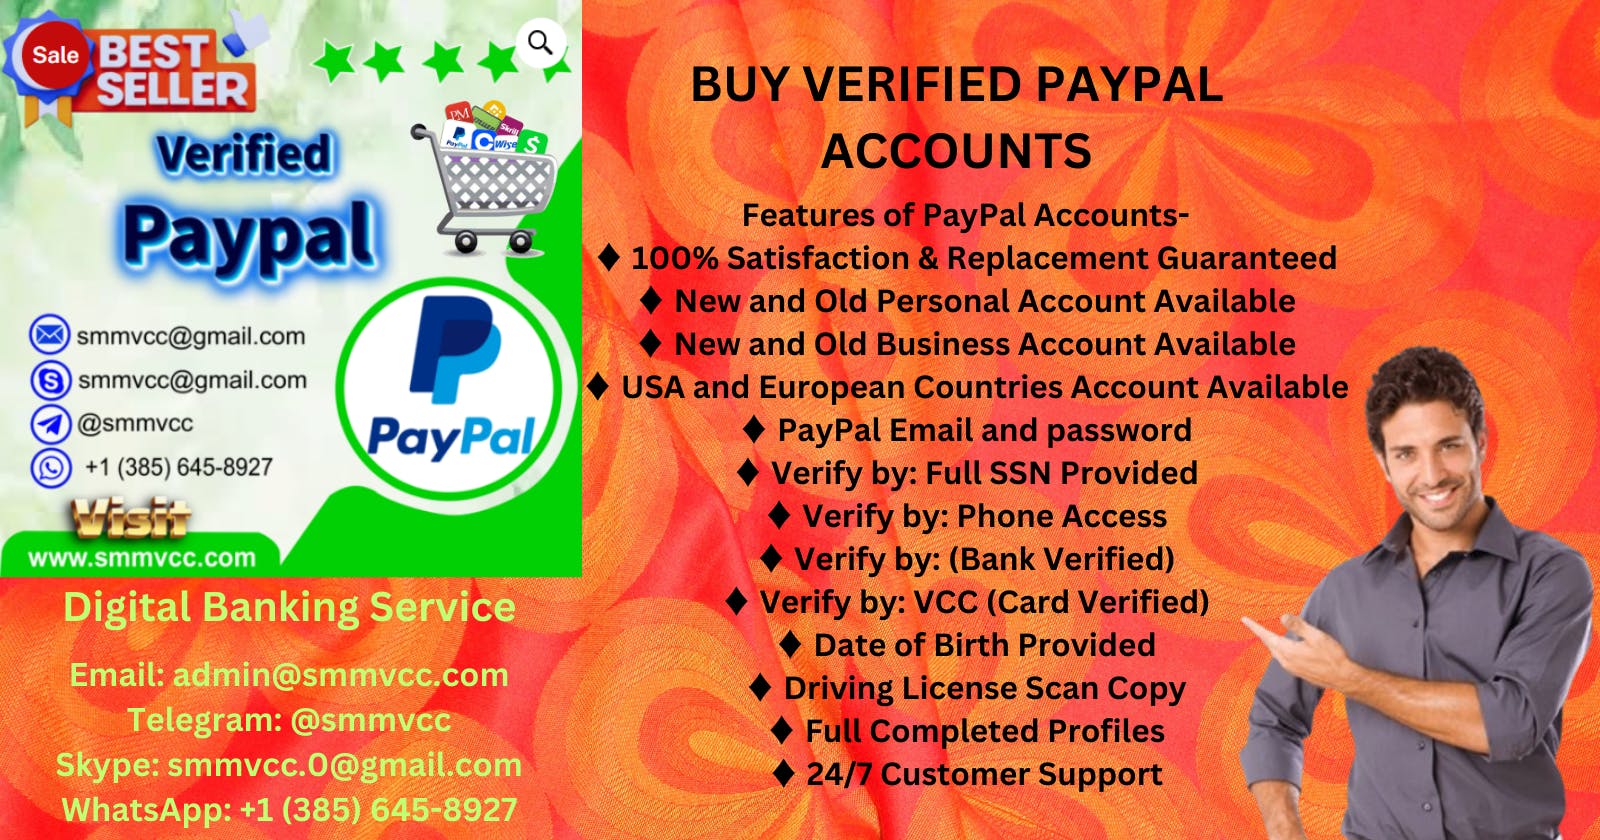 The Step-By-Step Process of Buying a Verified PayPal Account